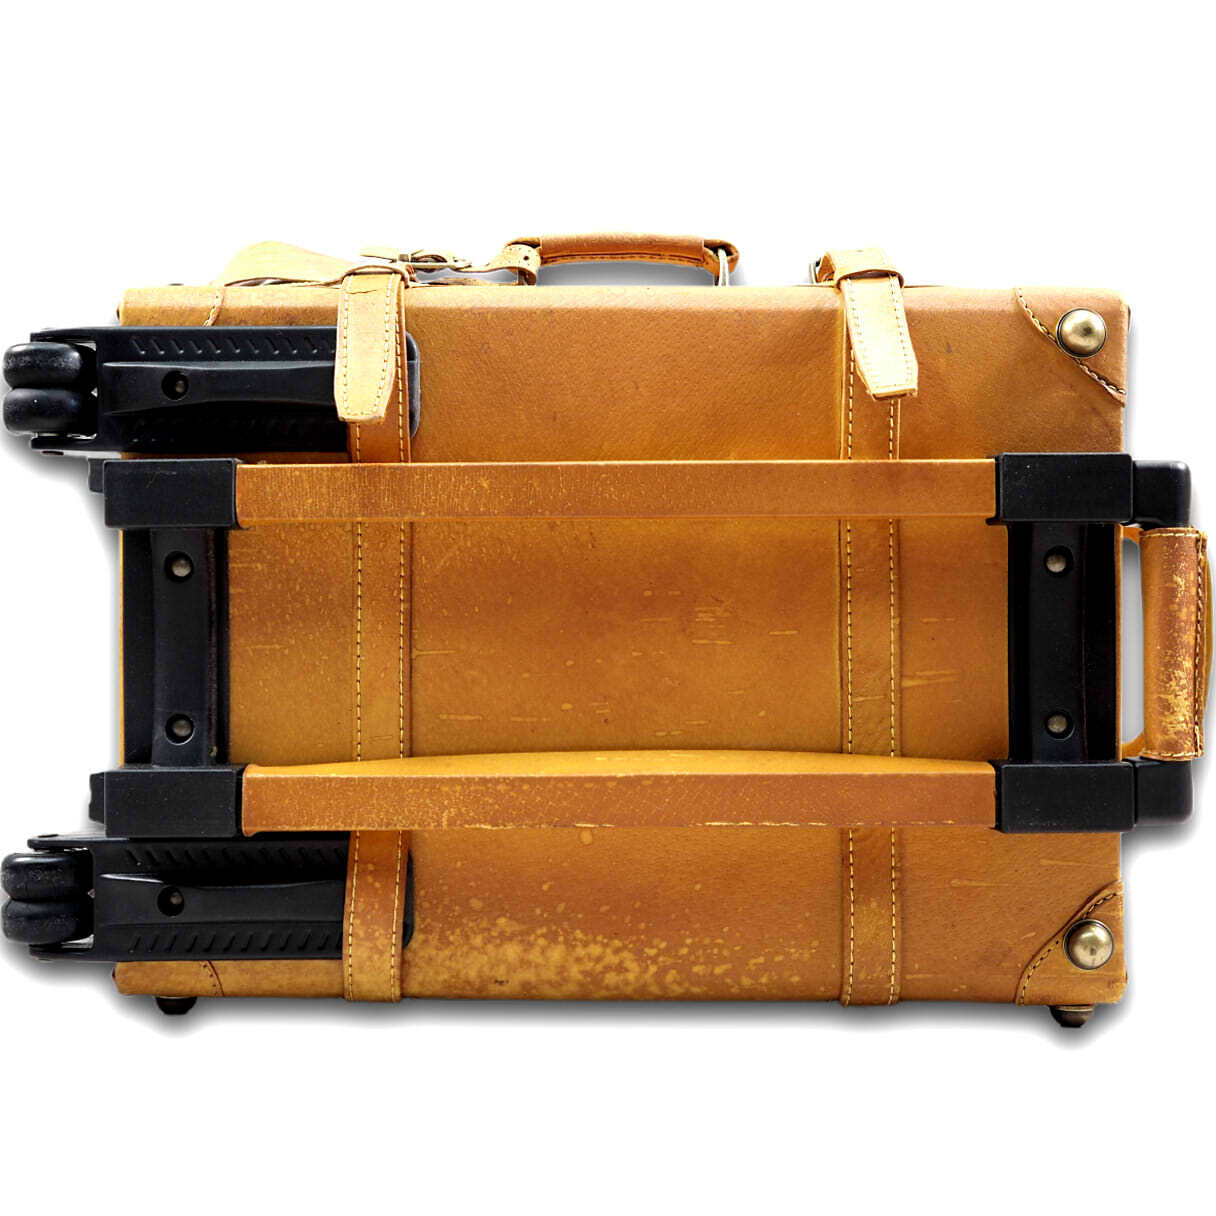 LEATHER ANTIQUE CARRYCASE｜TIME WALKER｜レザーアンティークトランク ...